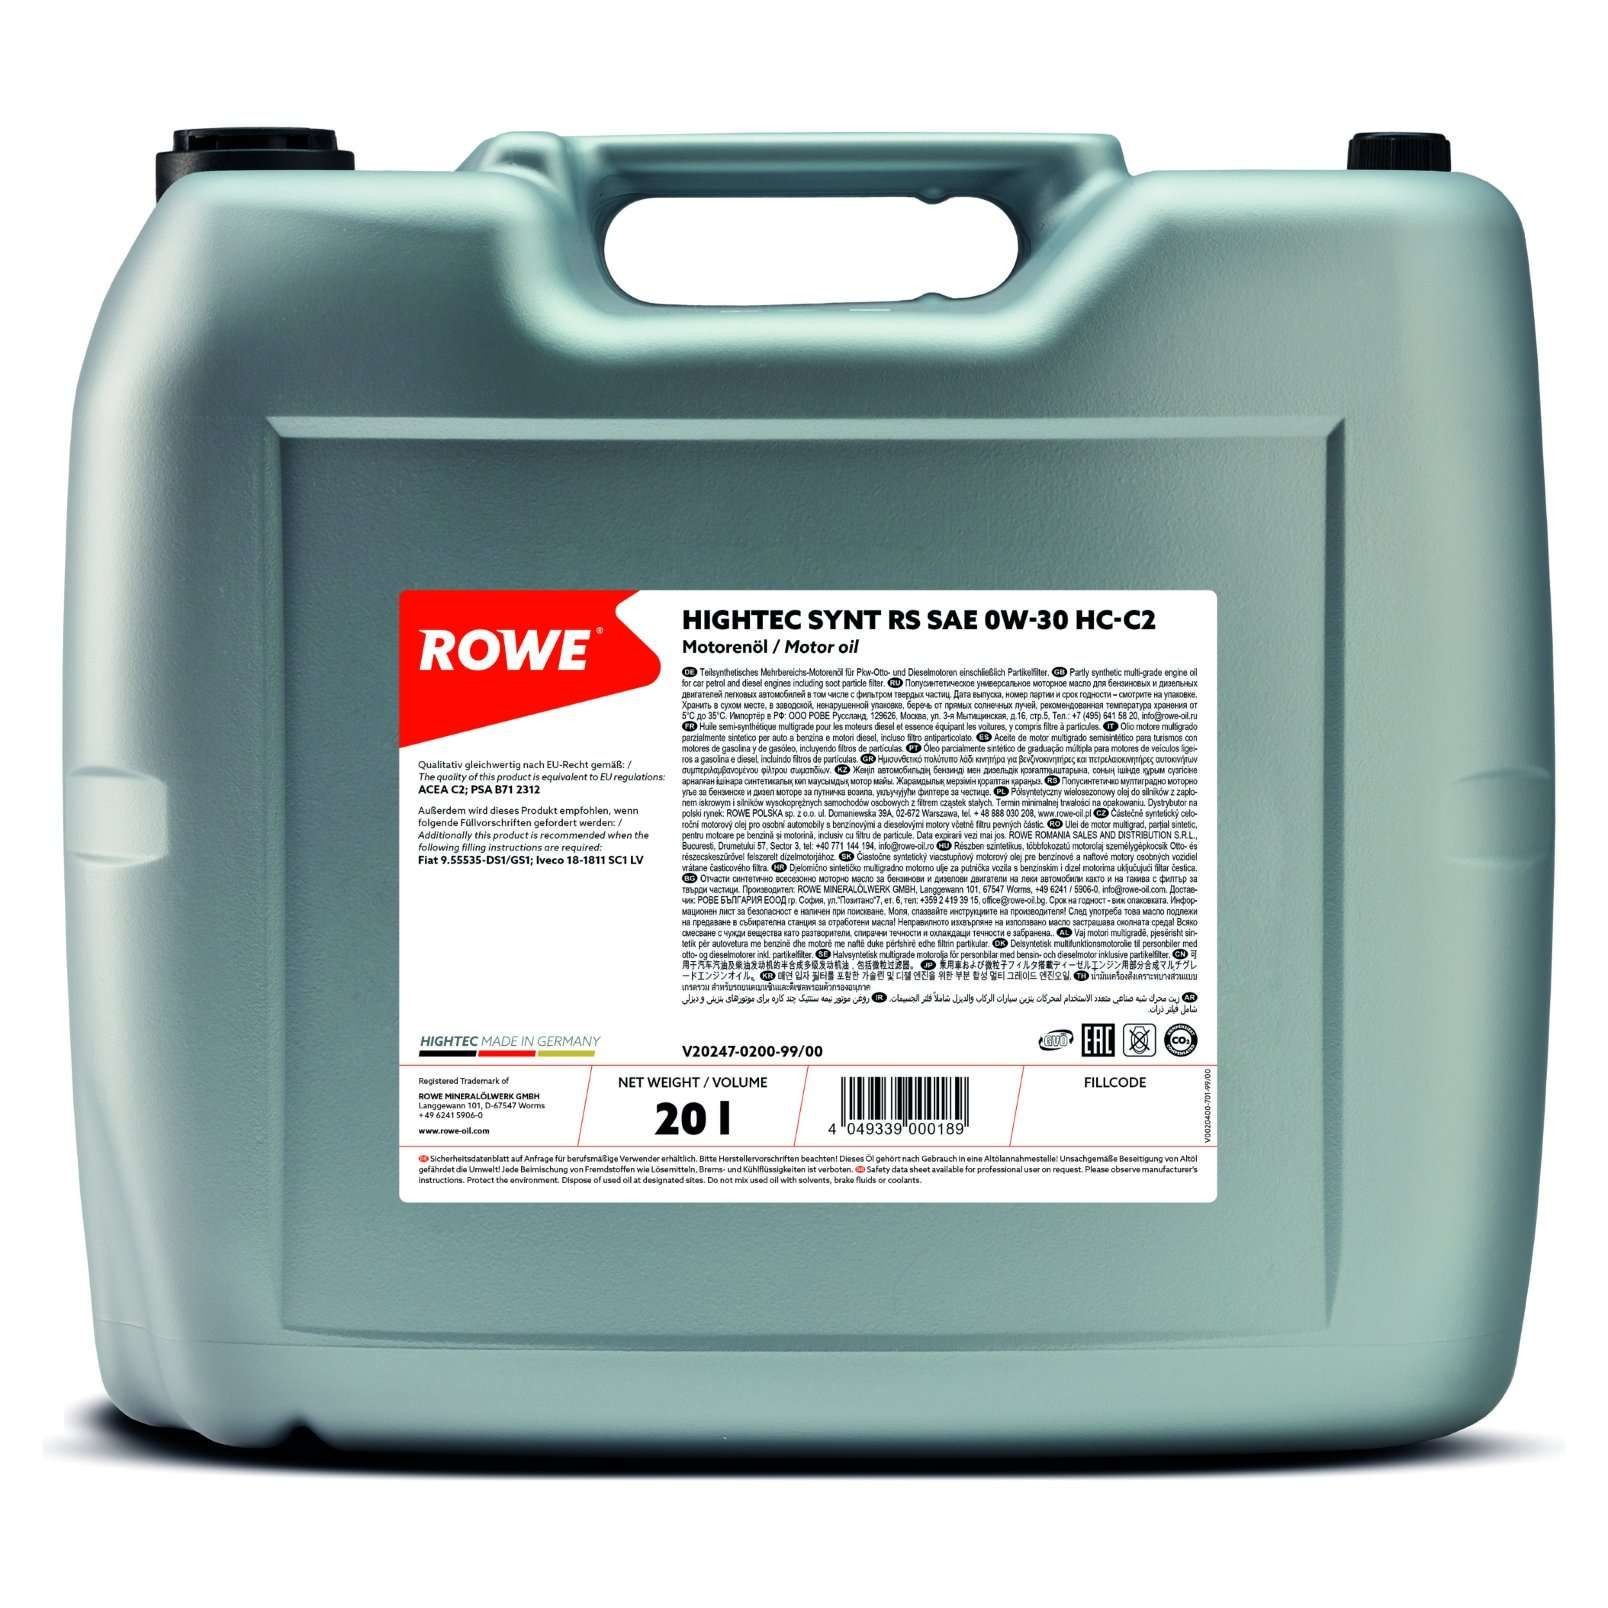 20247-0200-99 ROWE Oil IVECO 0W-30, 20l, Part Synthetic Oil